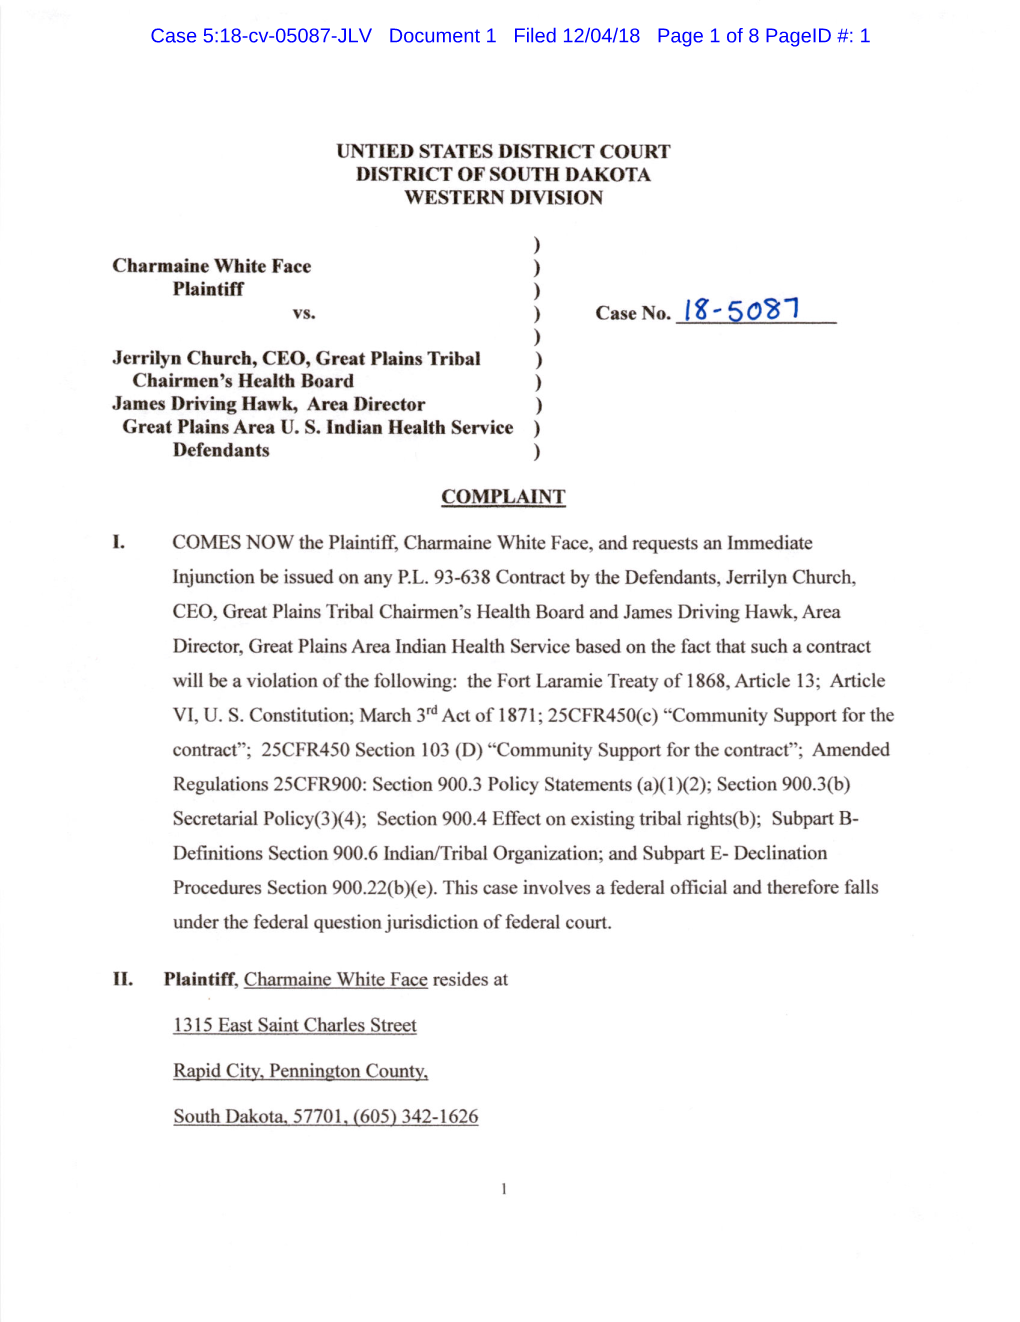 Filed the Case Against Indian Health Service and the Great Plains Tribal